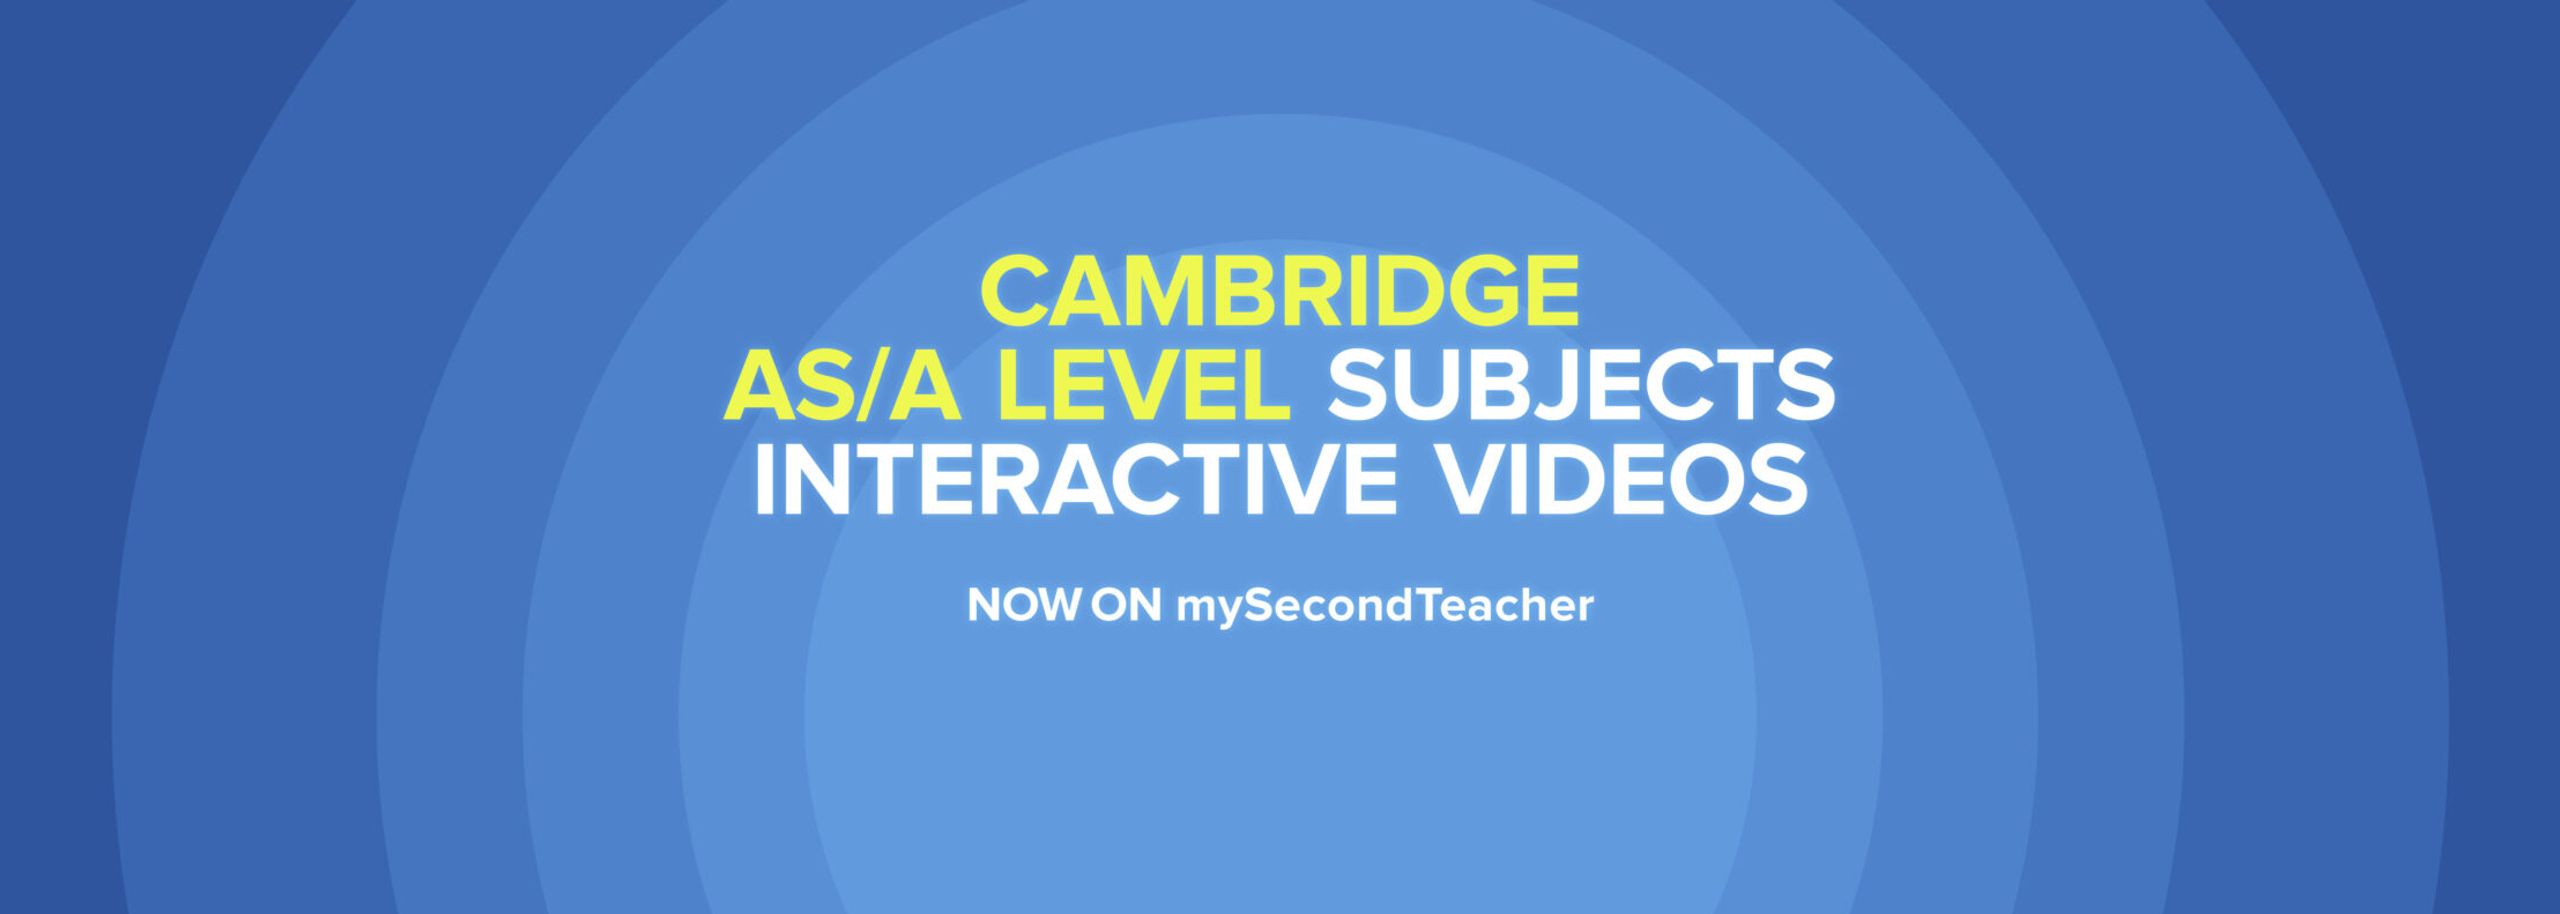 Advanced Pedagogy Announces Release of Interactive Learning Video Series for six Cambridge AS/A Levels Subjects